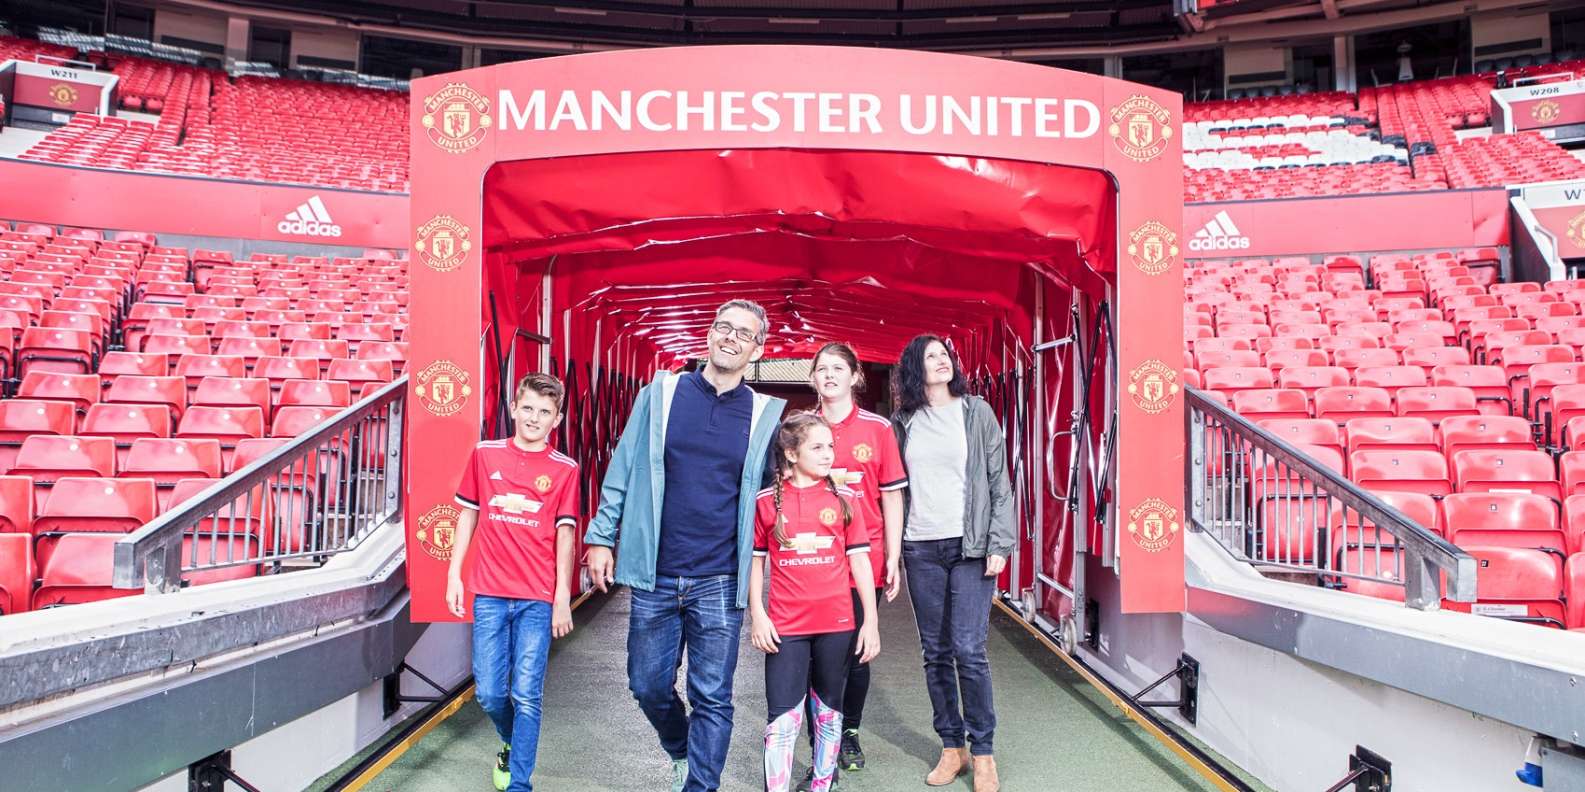 man united tours old trafford